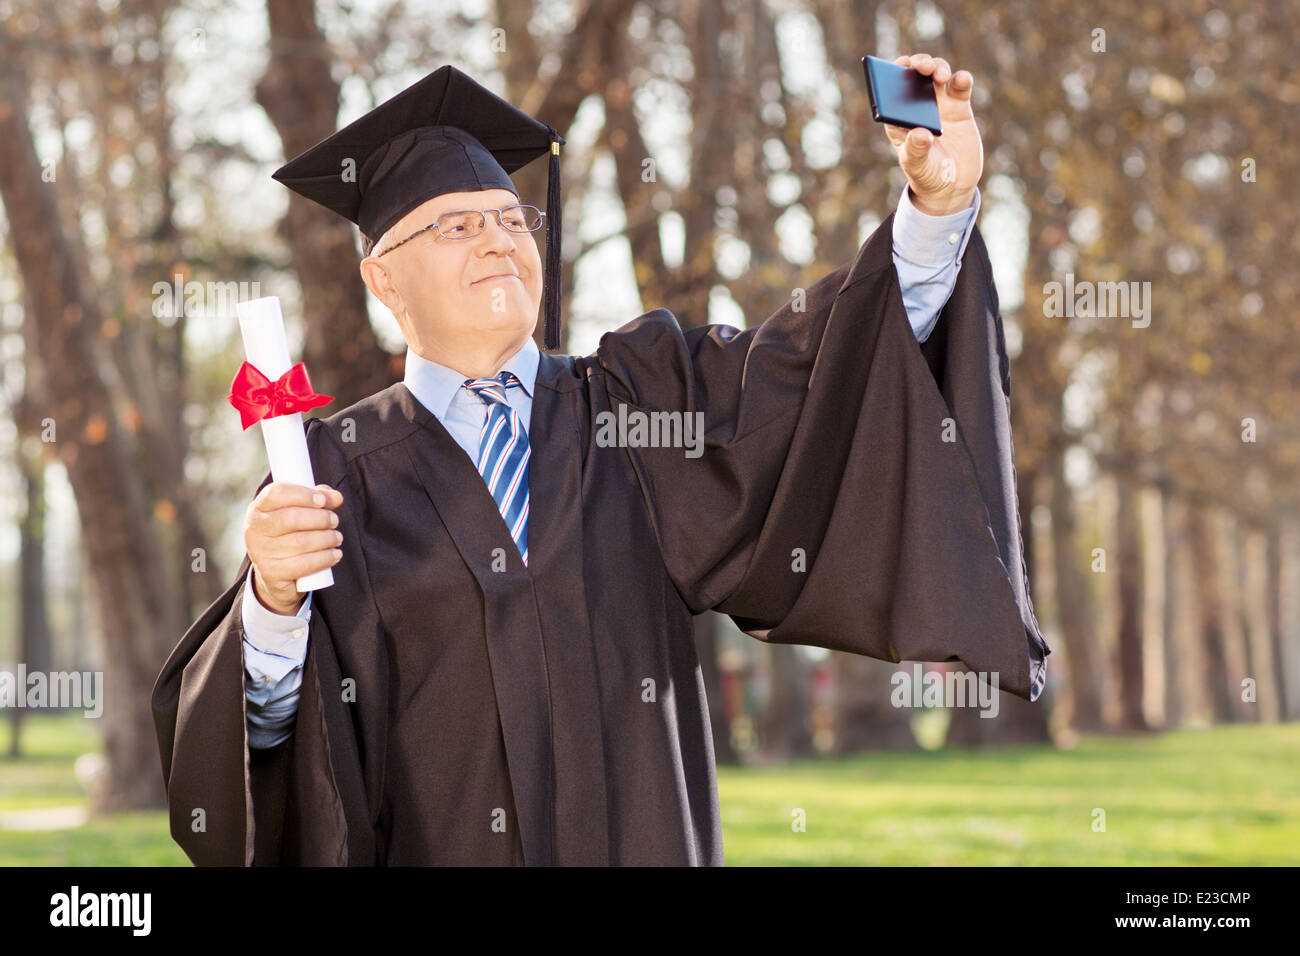 Mature man holding diploma and taking selfie in park Stock Photo